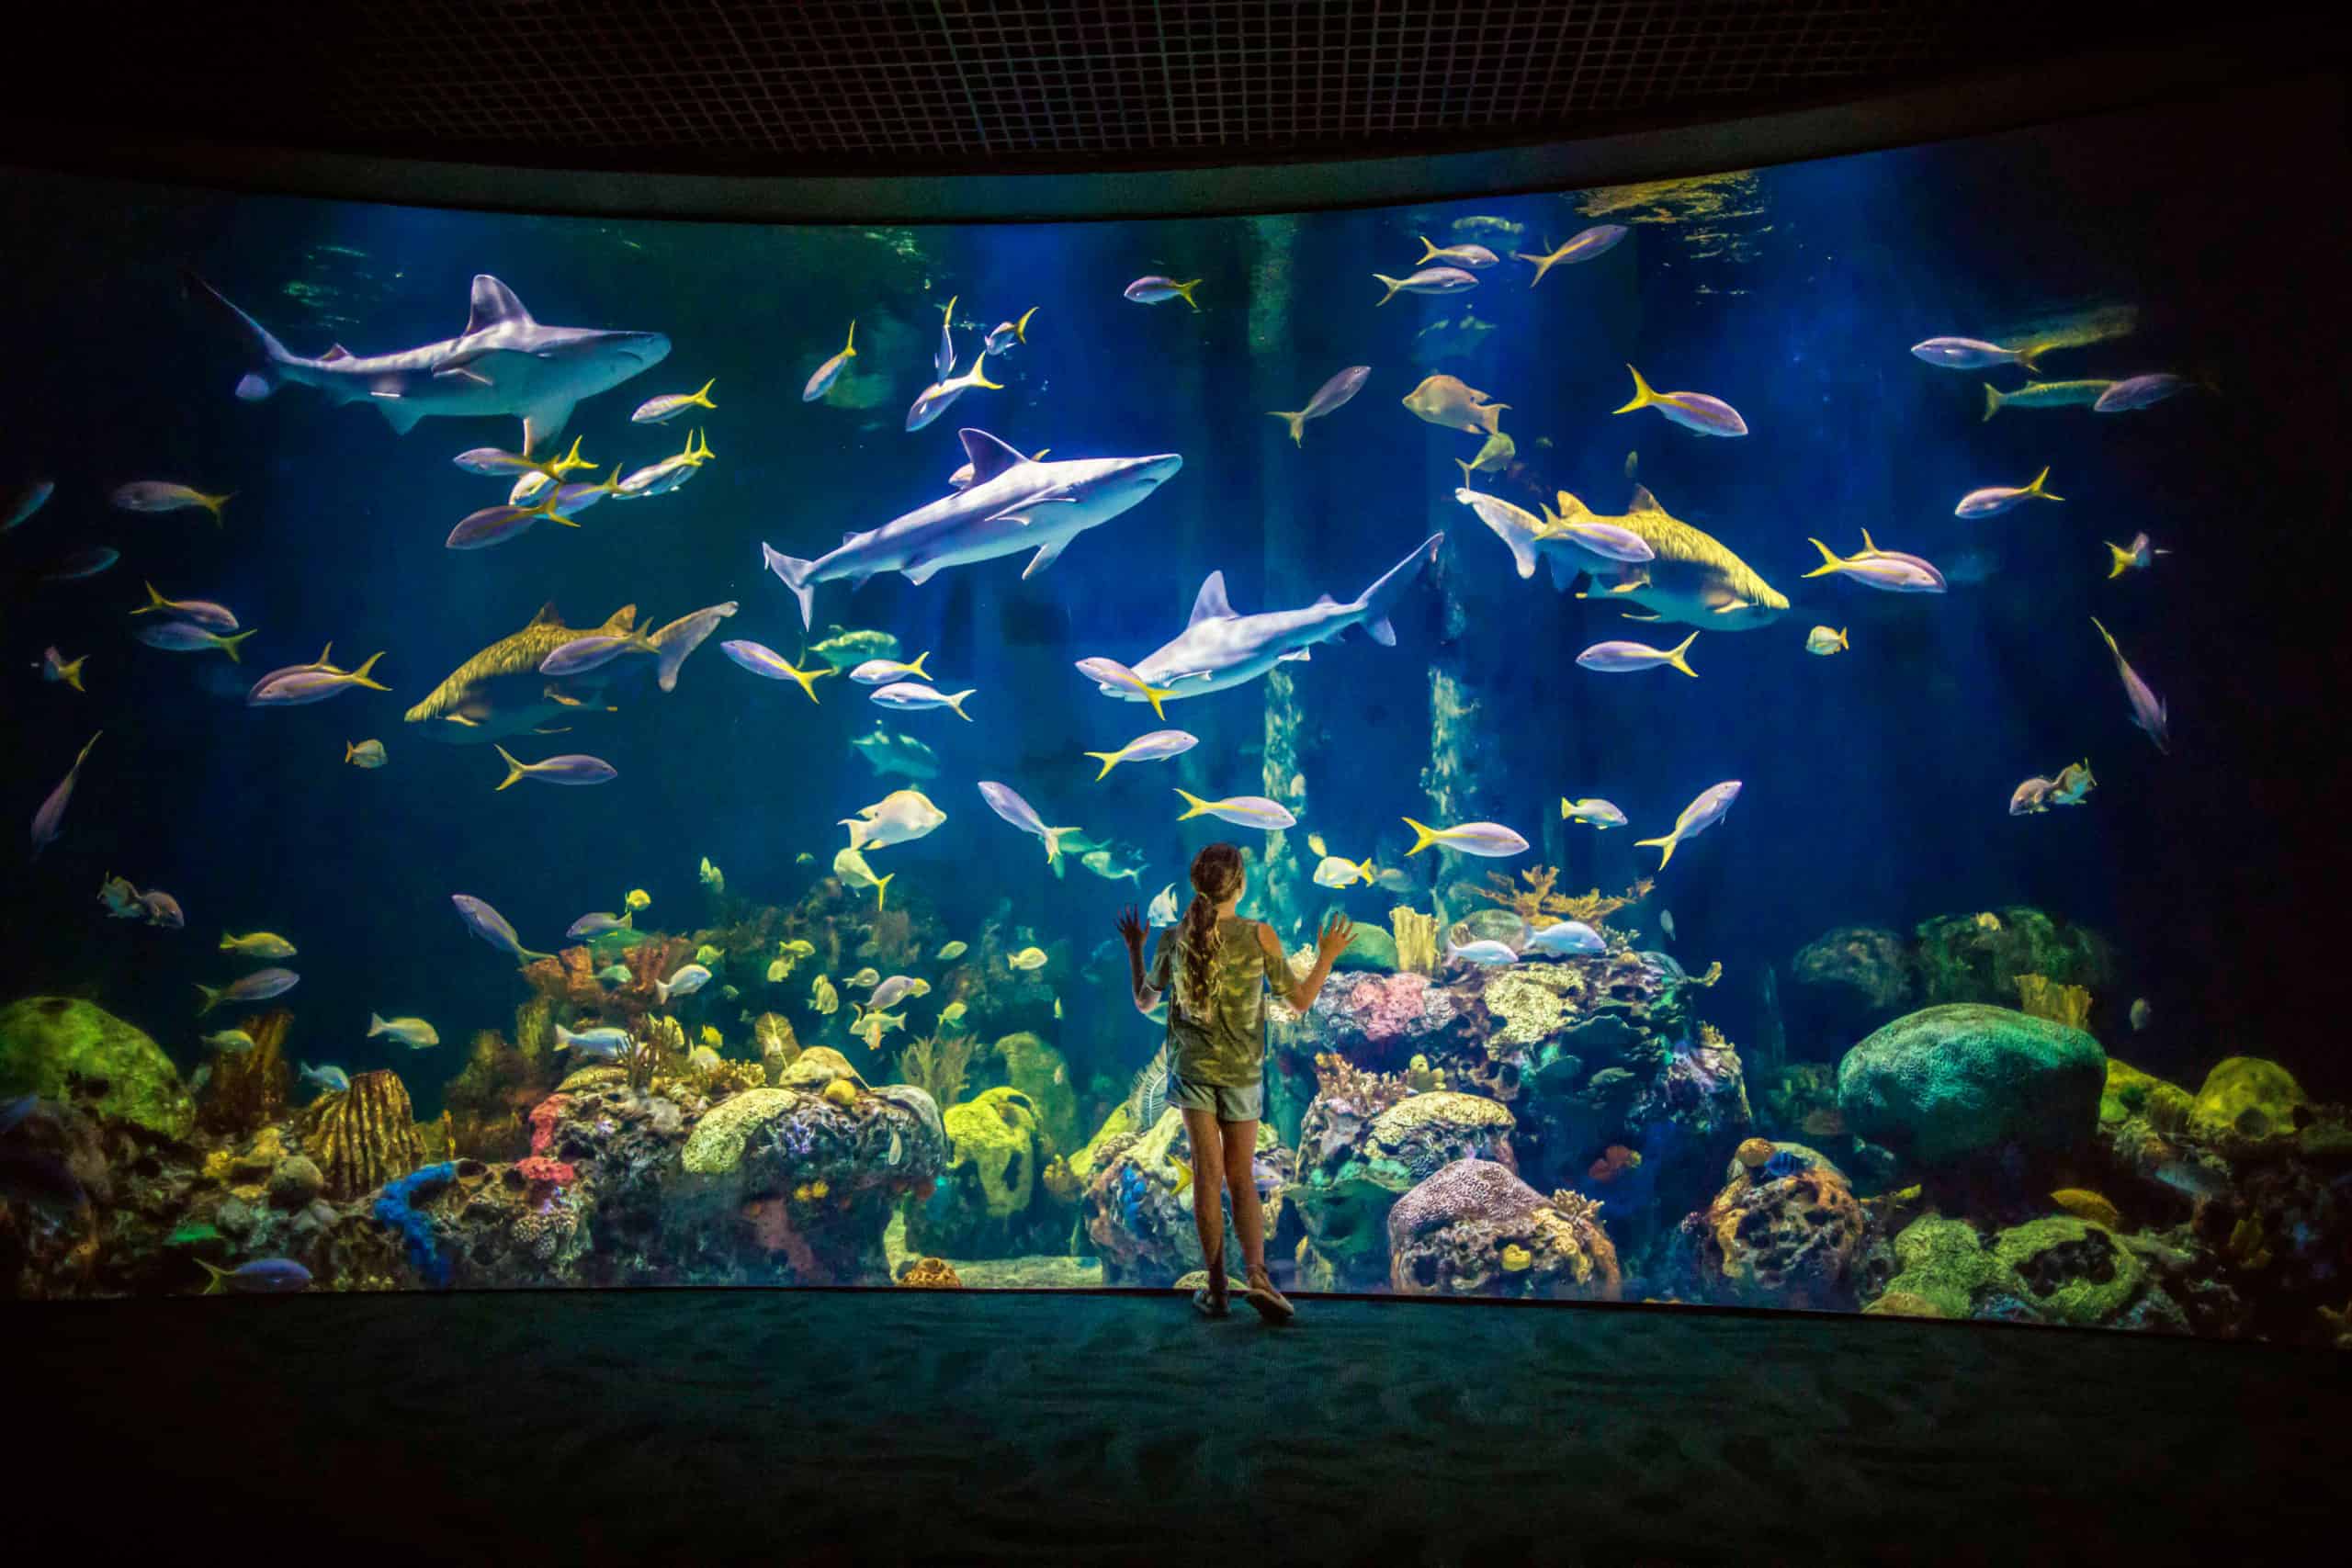 It's Official: Johnny Morris' Wonders of Wildlife Once Again Named #1  Aquarium in North America - Bass Pro